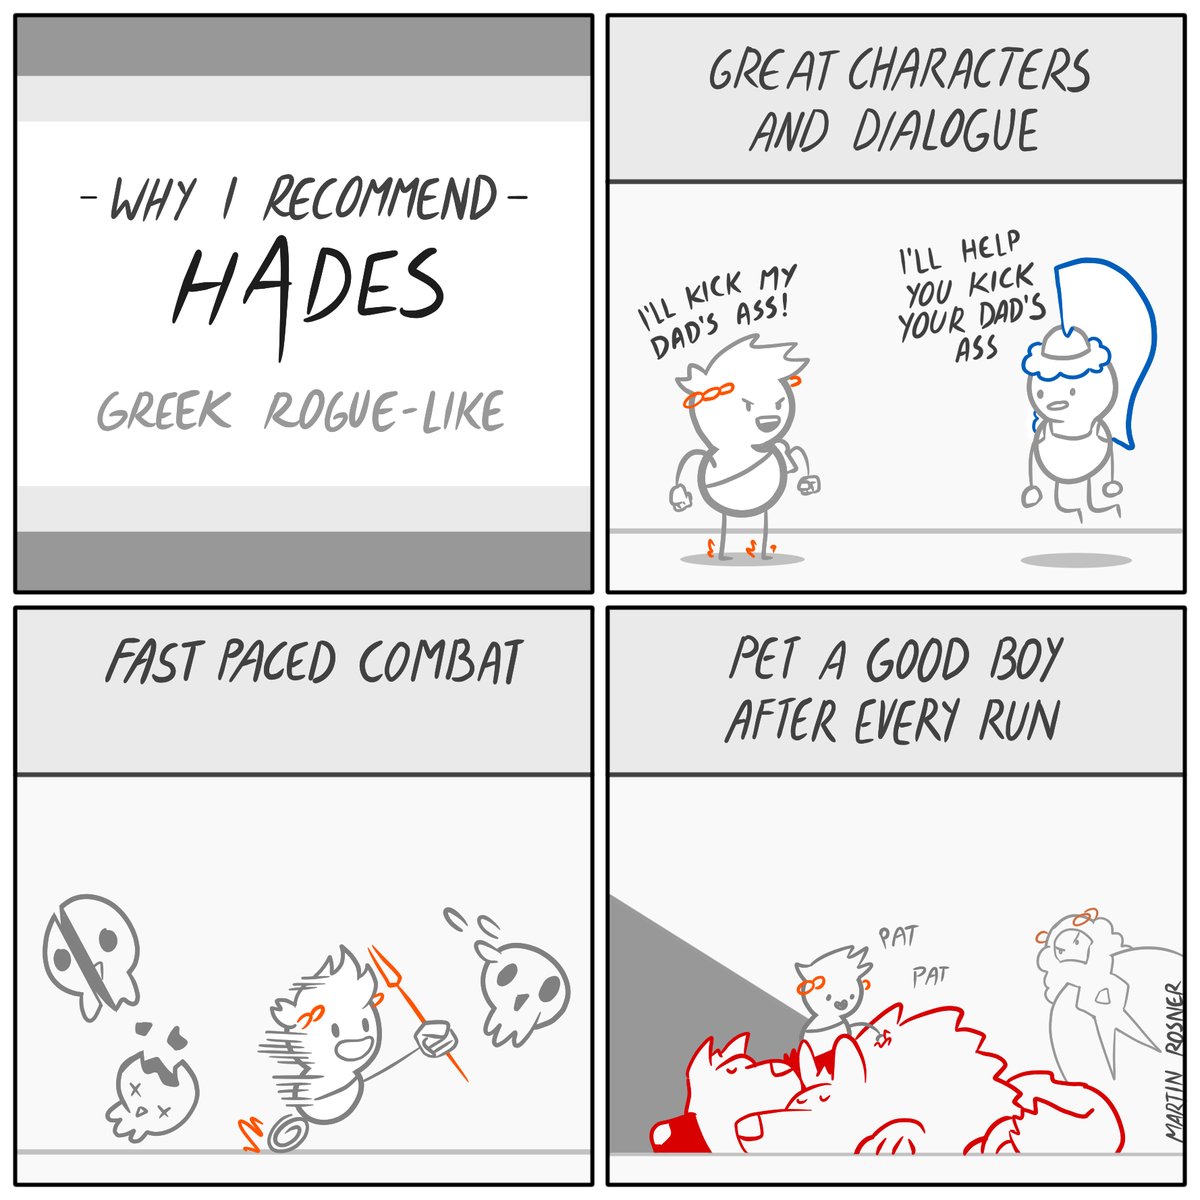 Why I recommend: Hades by Supergiant Games 